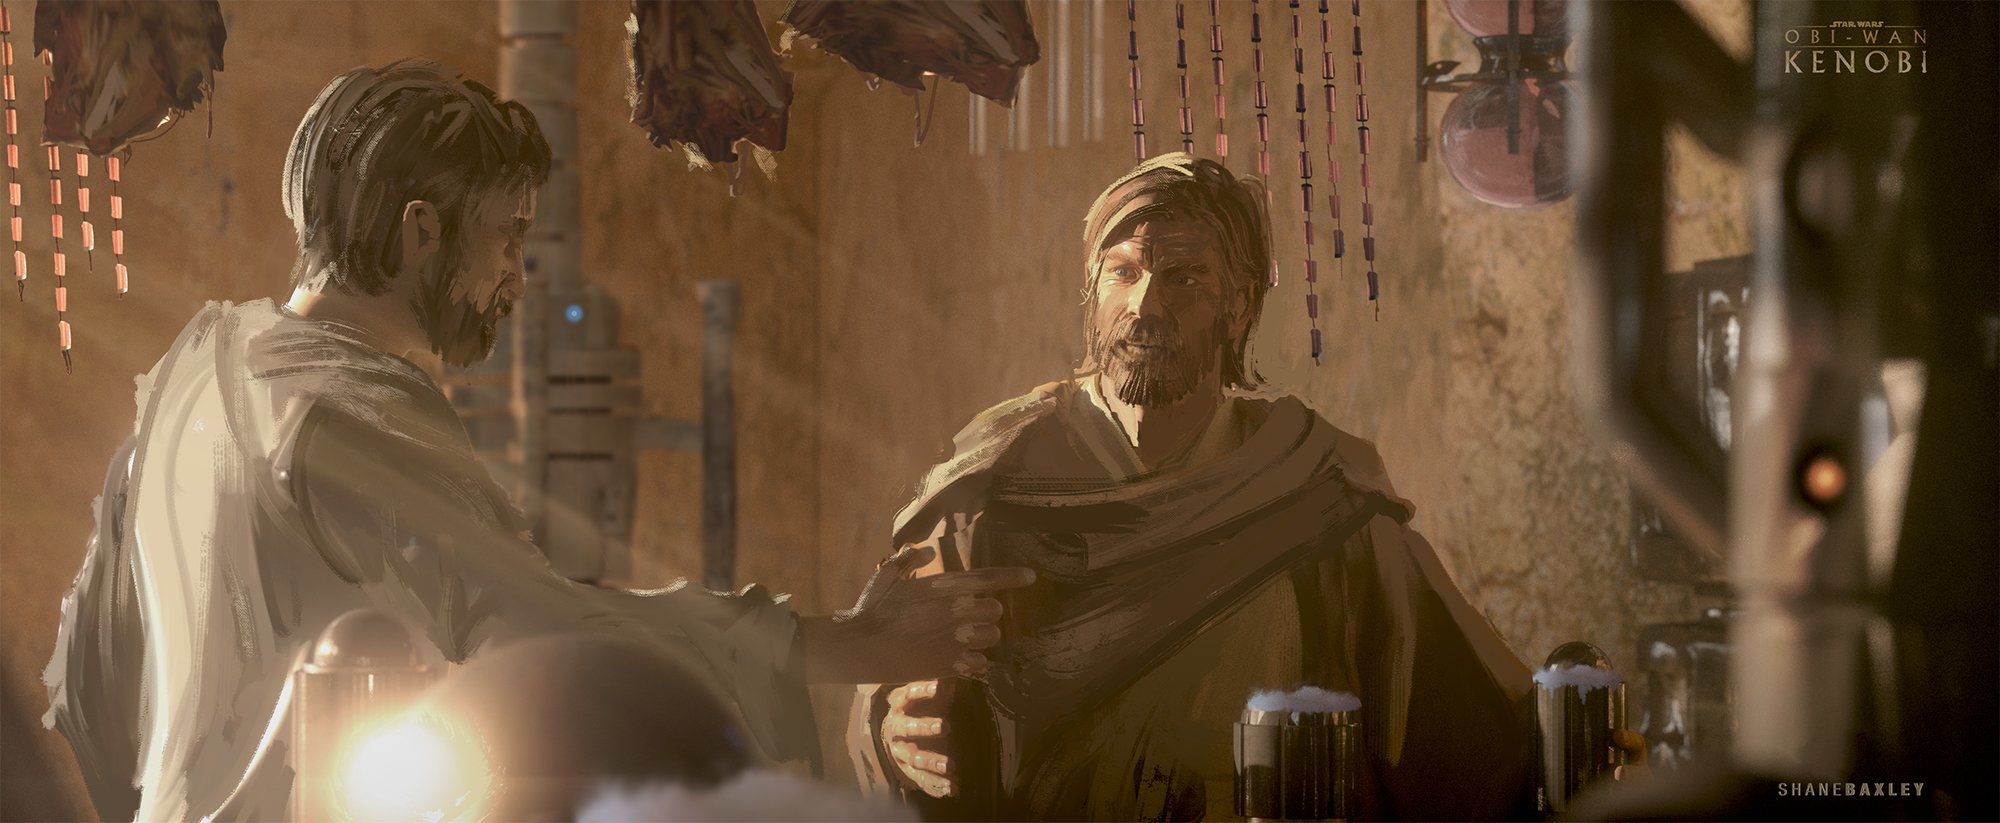  Kenobi and Lars having a discussion at the bar 